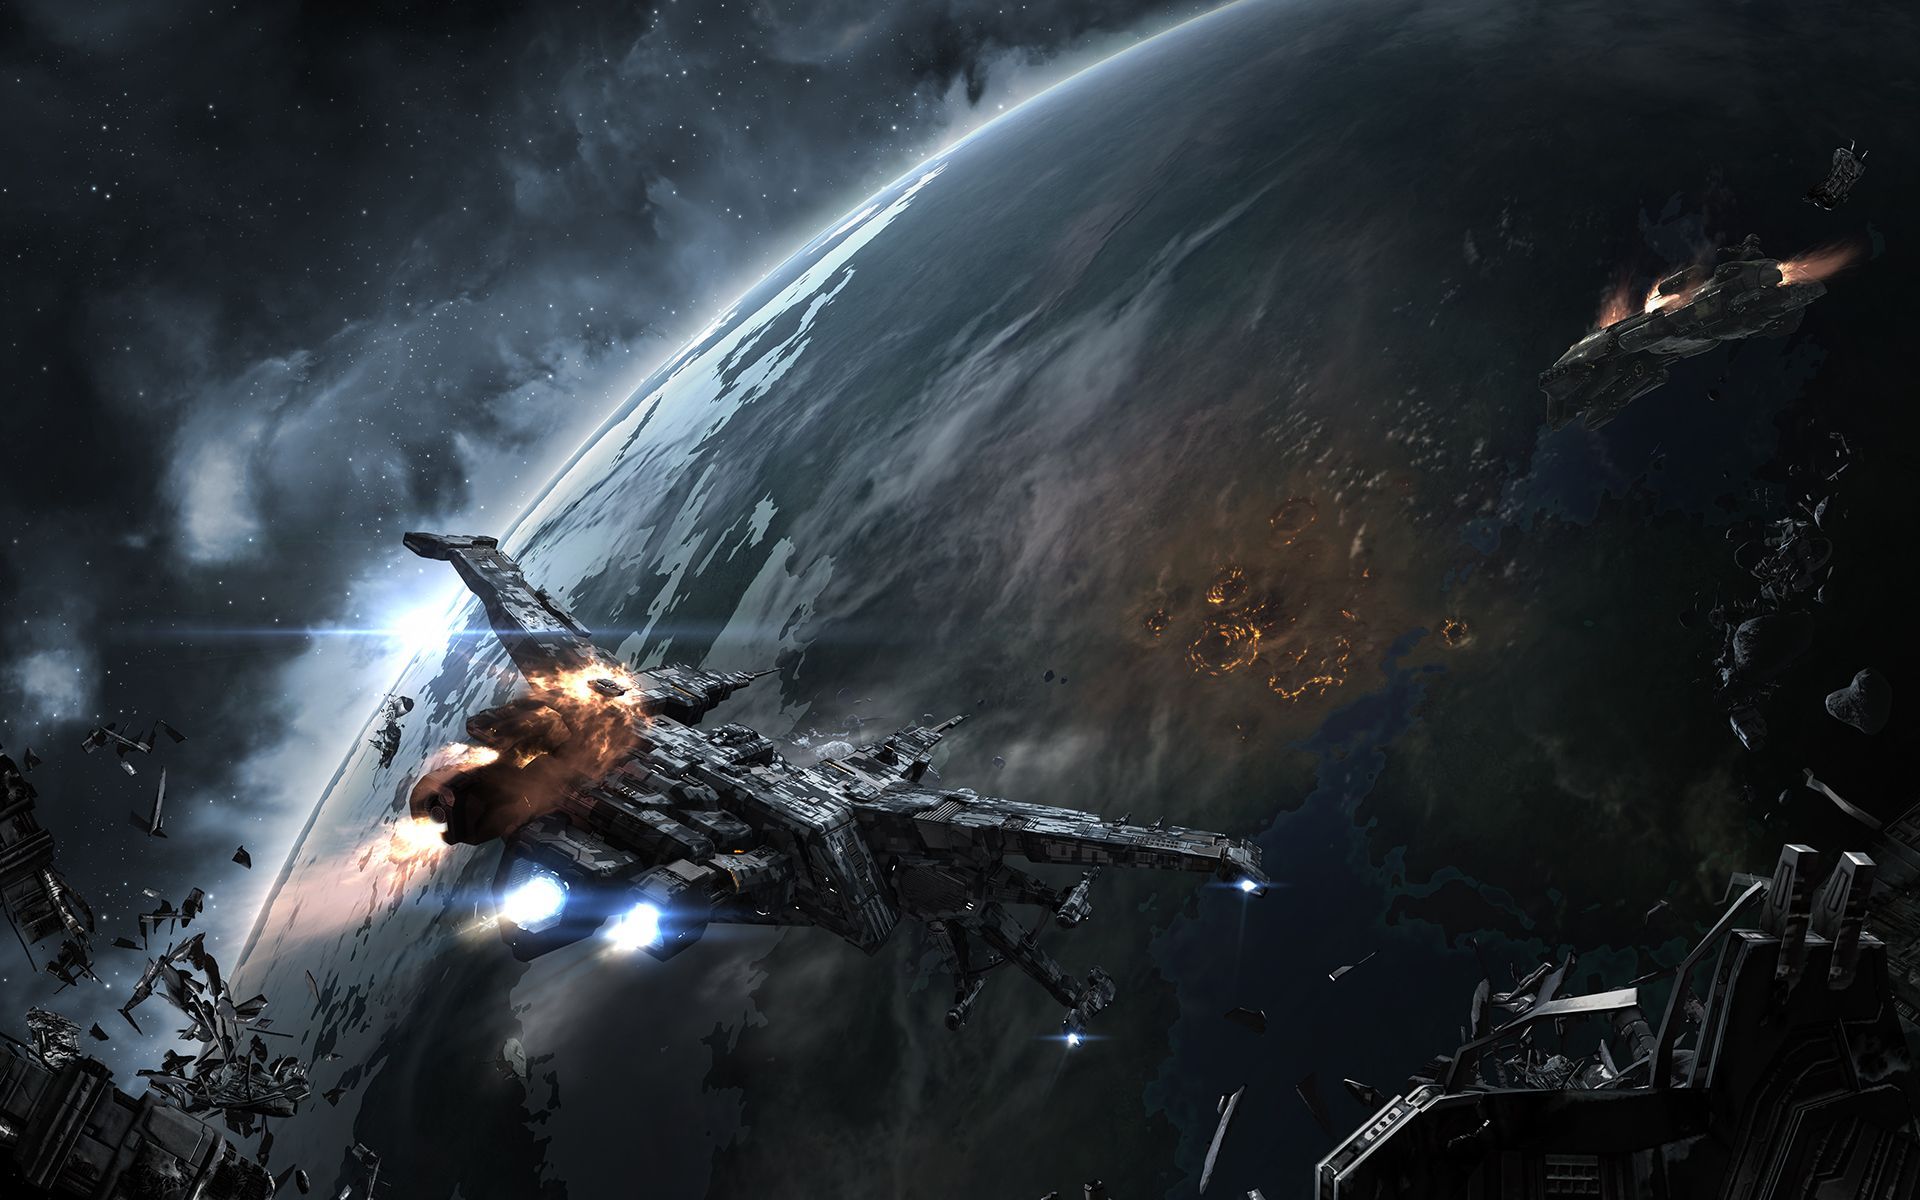 EVE Online Ships Planets Games Space Spaceship Planet Sci Fi Wallpaper Background. Eve Online, Sci Fi Wallpaper, Space Battles